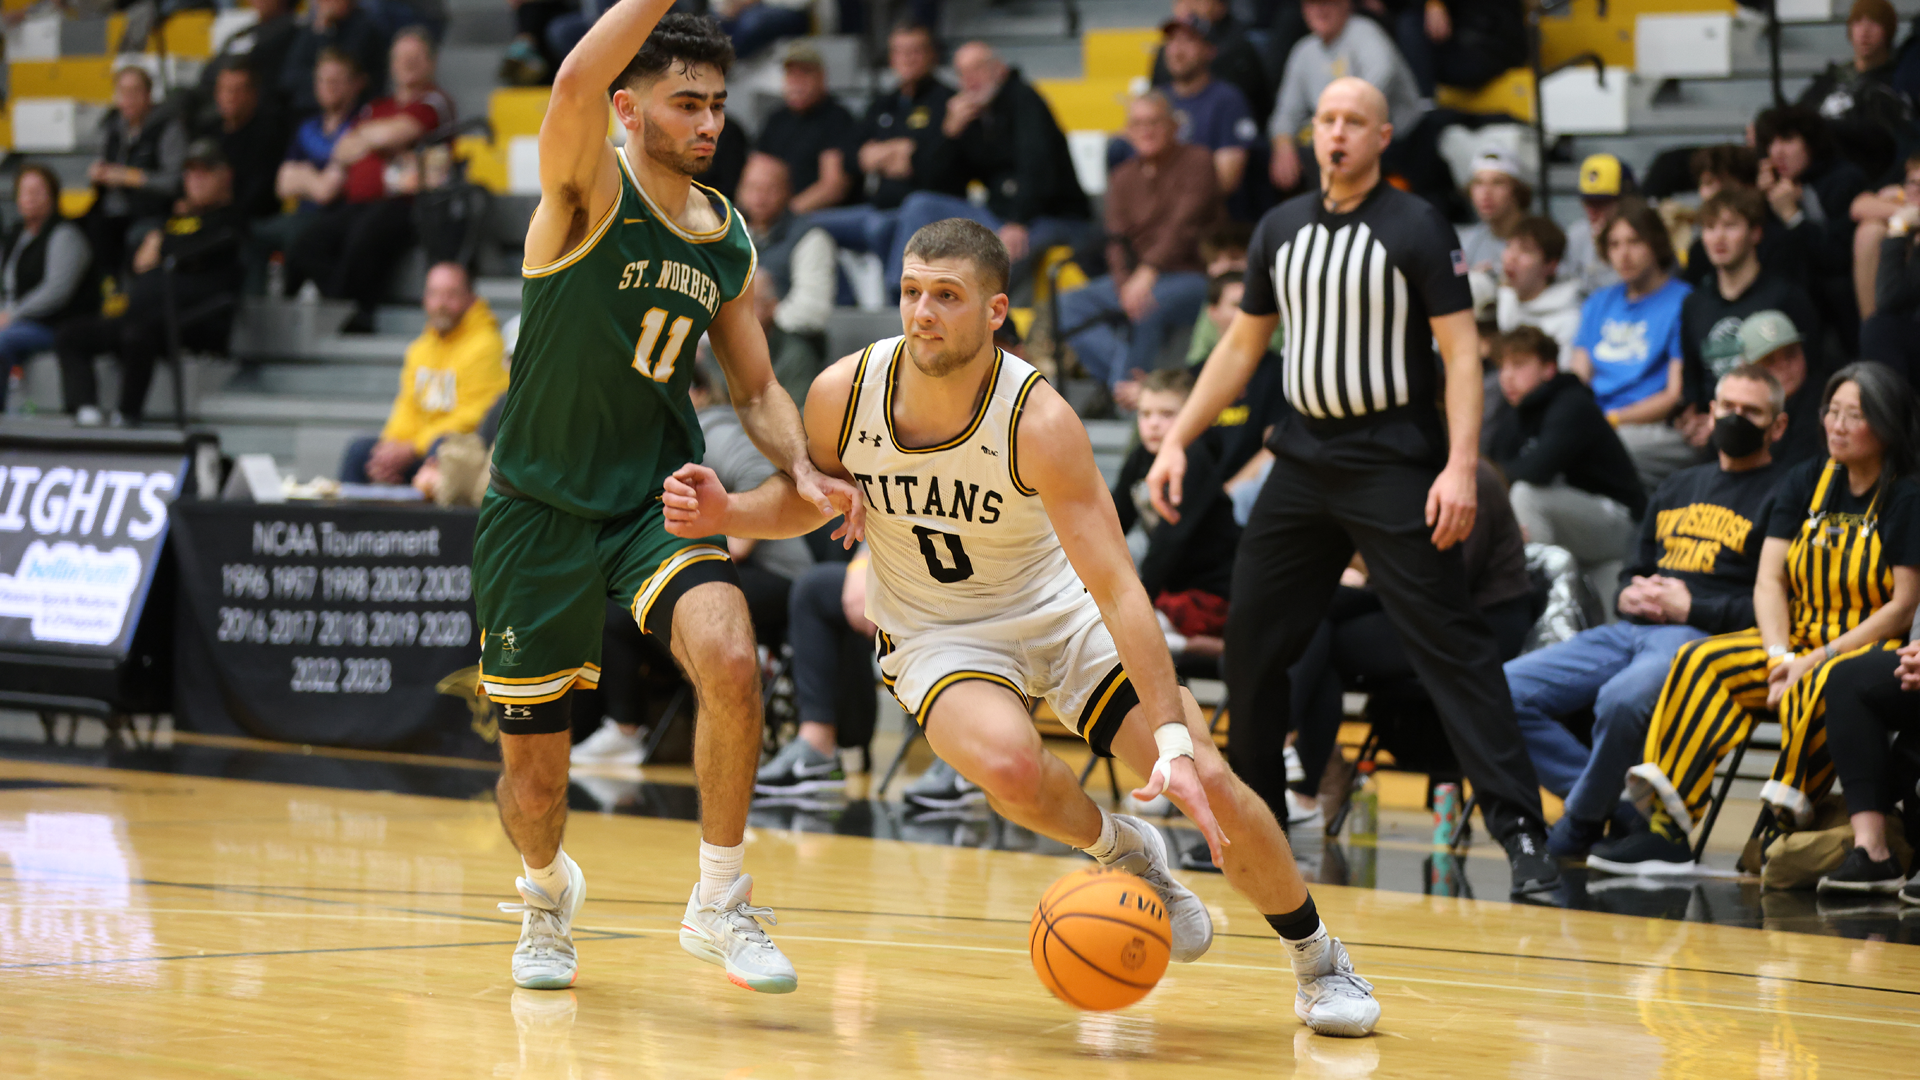 Reed Gunnink scored 12 points with three rebounds, assists and steals in the Titans' close loss to the Green Knights on Wednesday